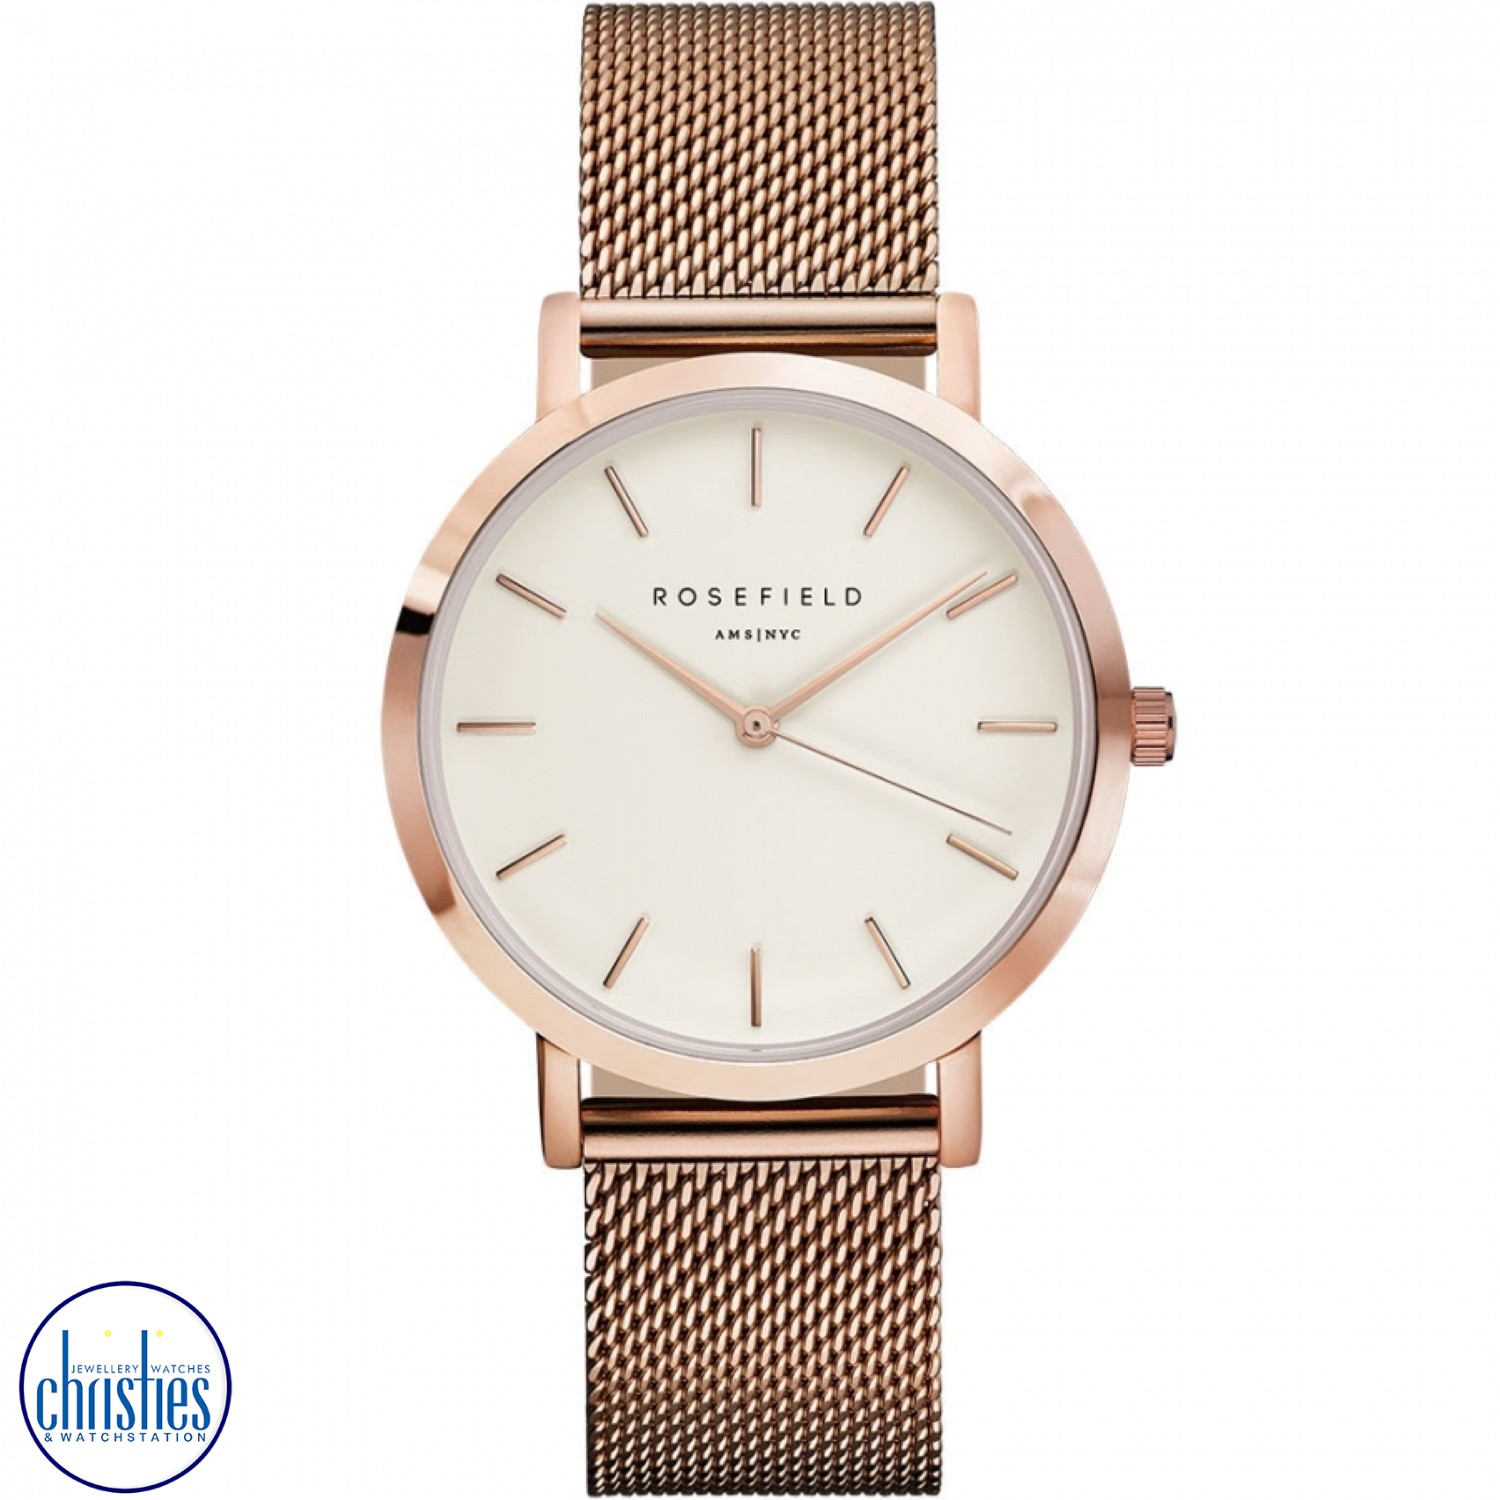 MWR-M42 ROSEFIELD THE MERCER WHITE ROSE GOLD. The Rosefield watch model MWR-M42 is a classic and elegant timepiece designed for both men and women.